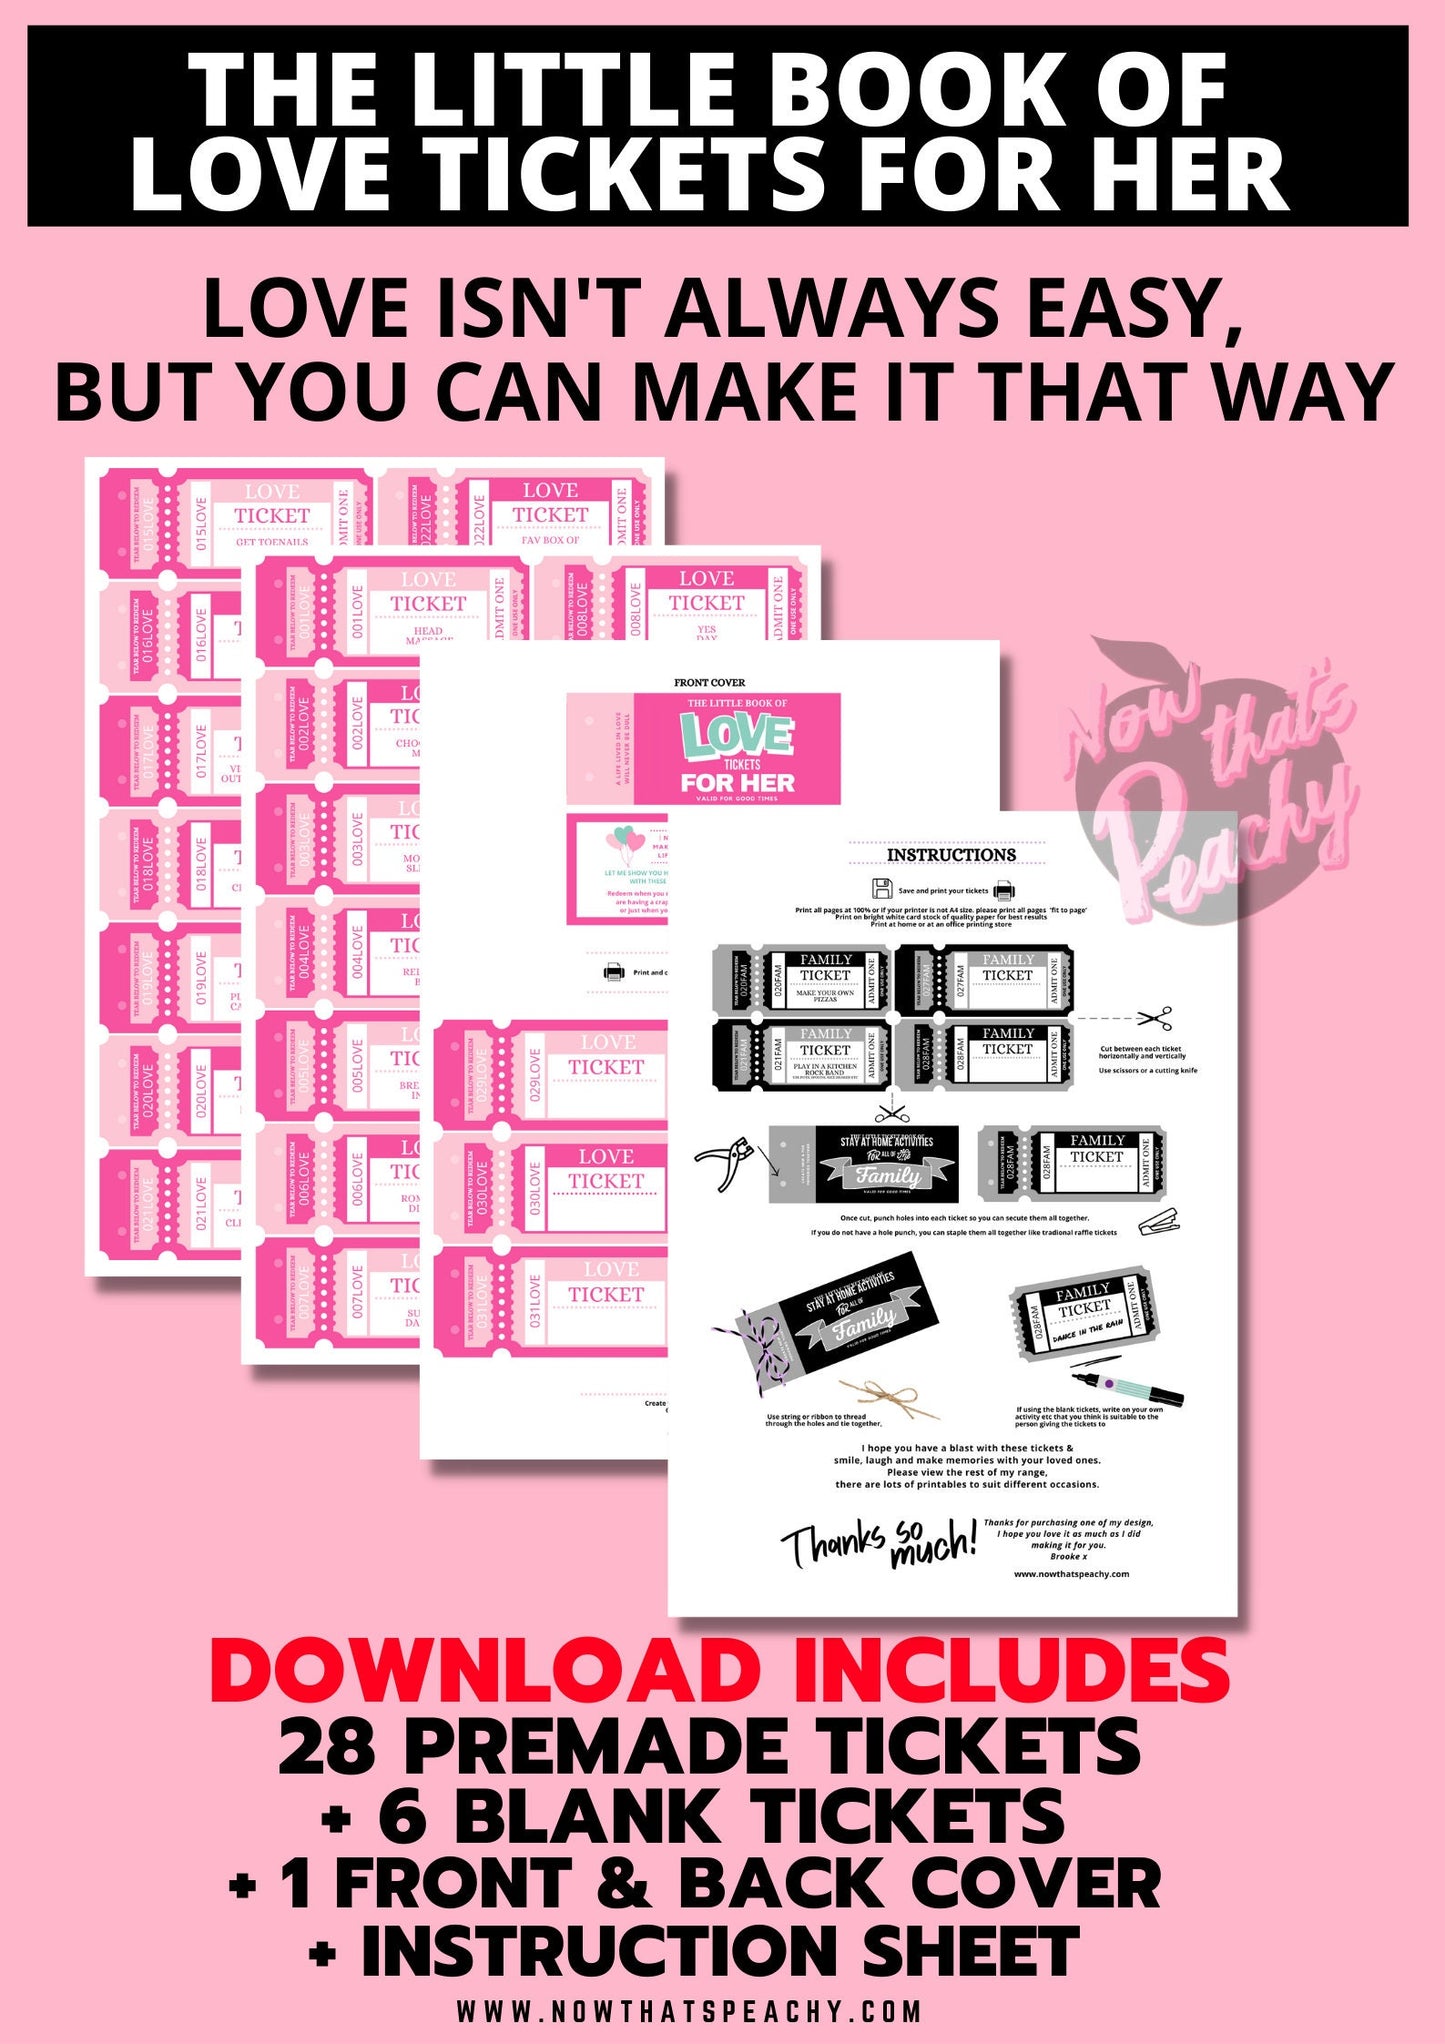 Shop for Couples Date ideas Ticket Voucher Coupon book printable diy print off valentines anniversary wife husband digital download fun cute idea present  print off retro vintage theme night out boyfriend girlfriend partner mrs man lady ladies girl  GF Miss adult explore anti vday  product shop easy cheap affordable personalized custom wedding bride gifts